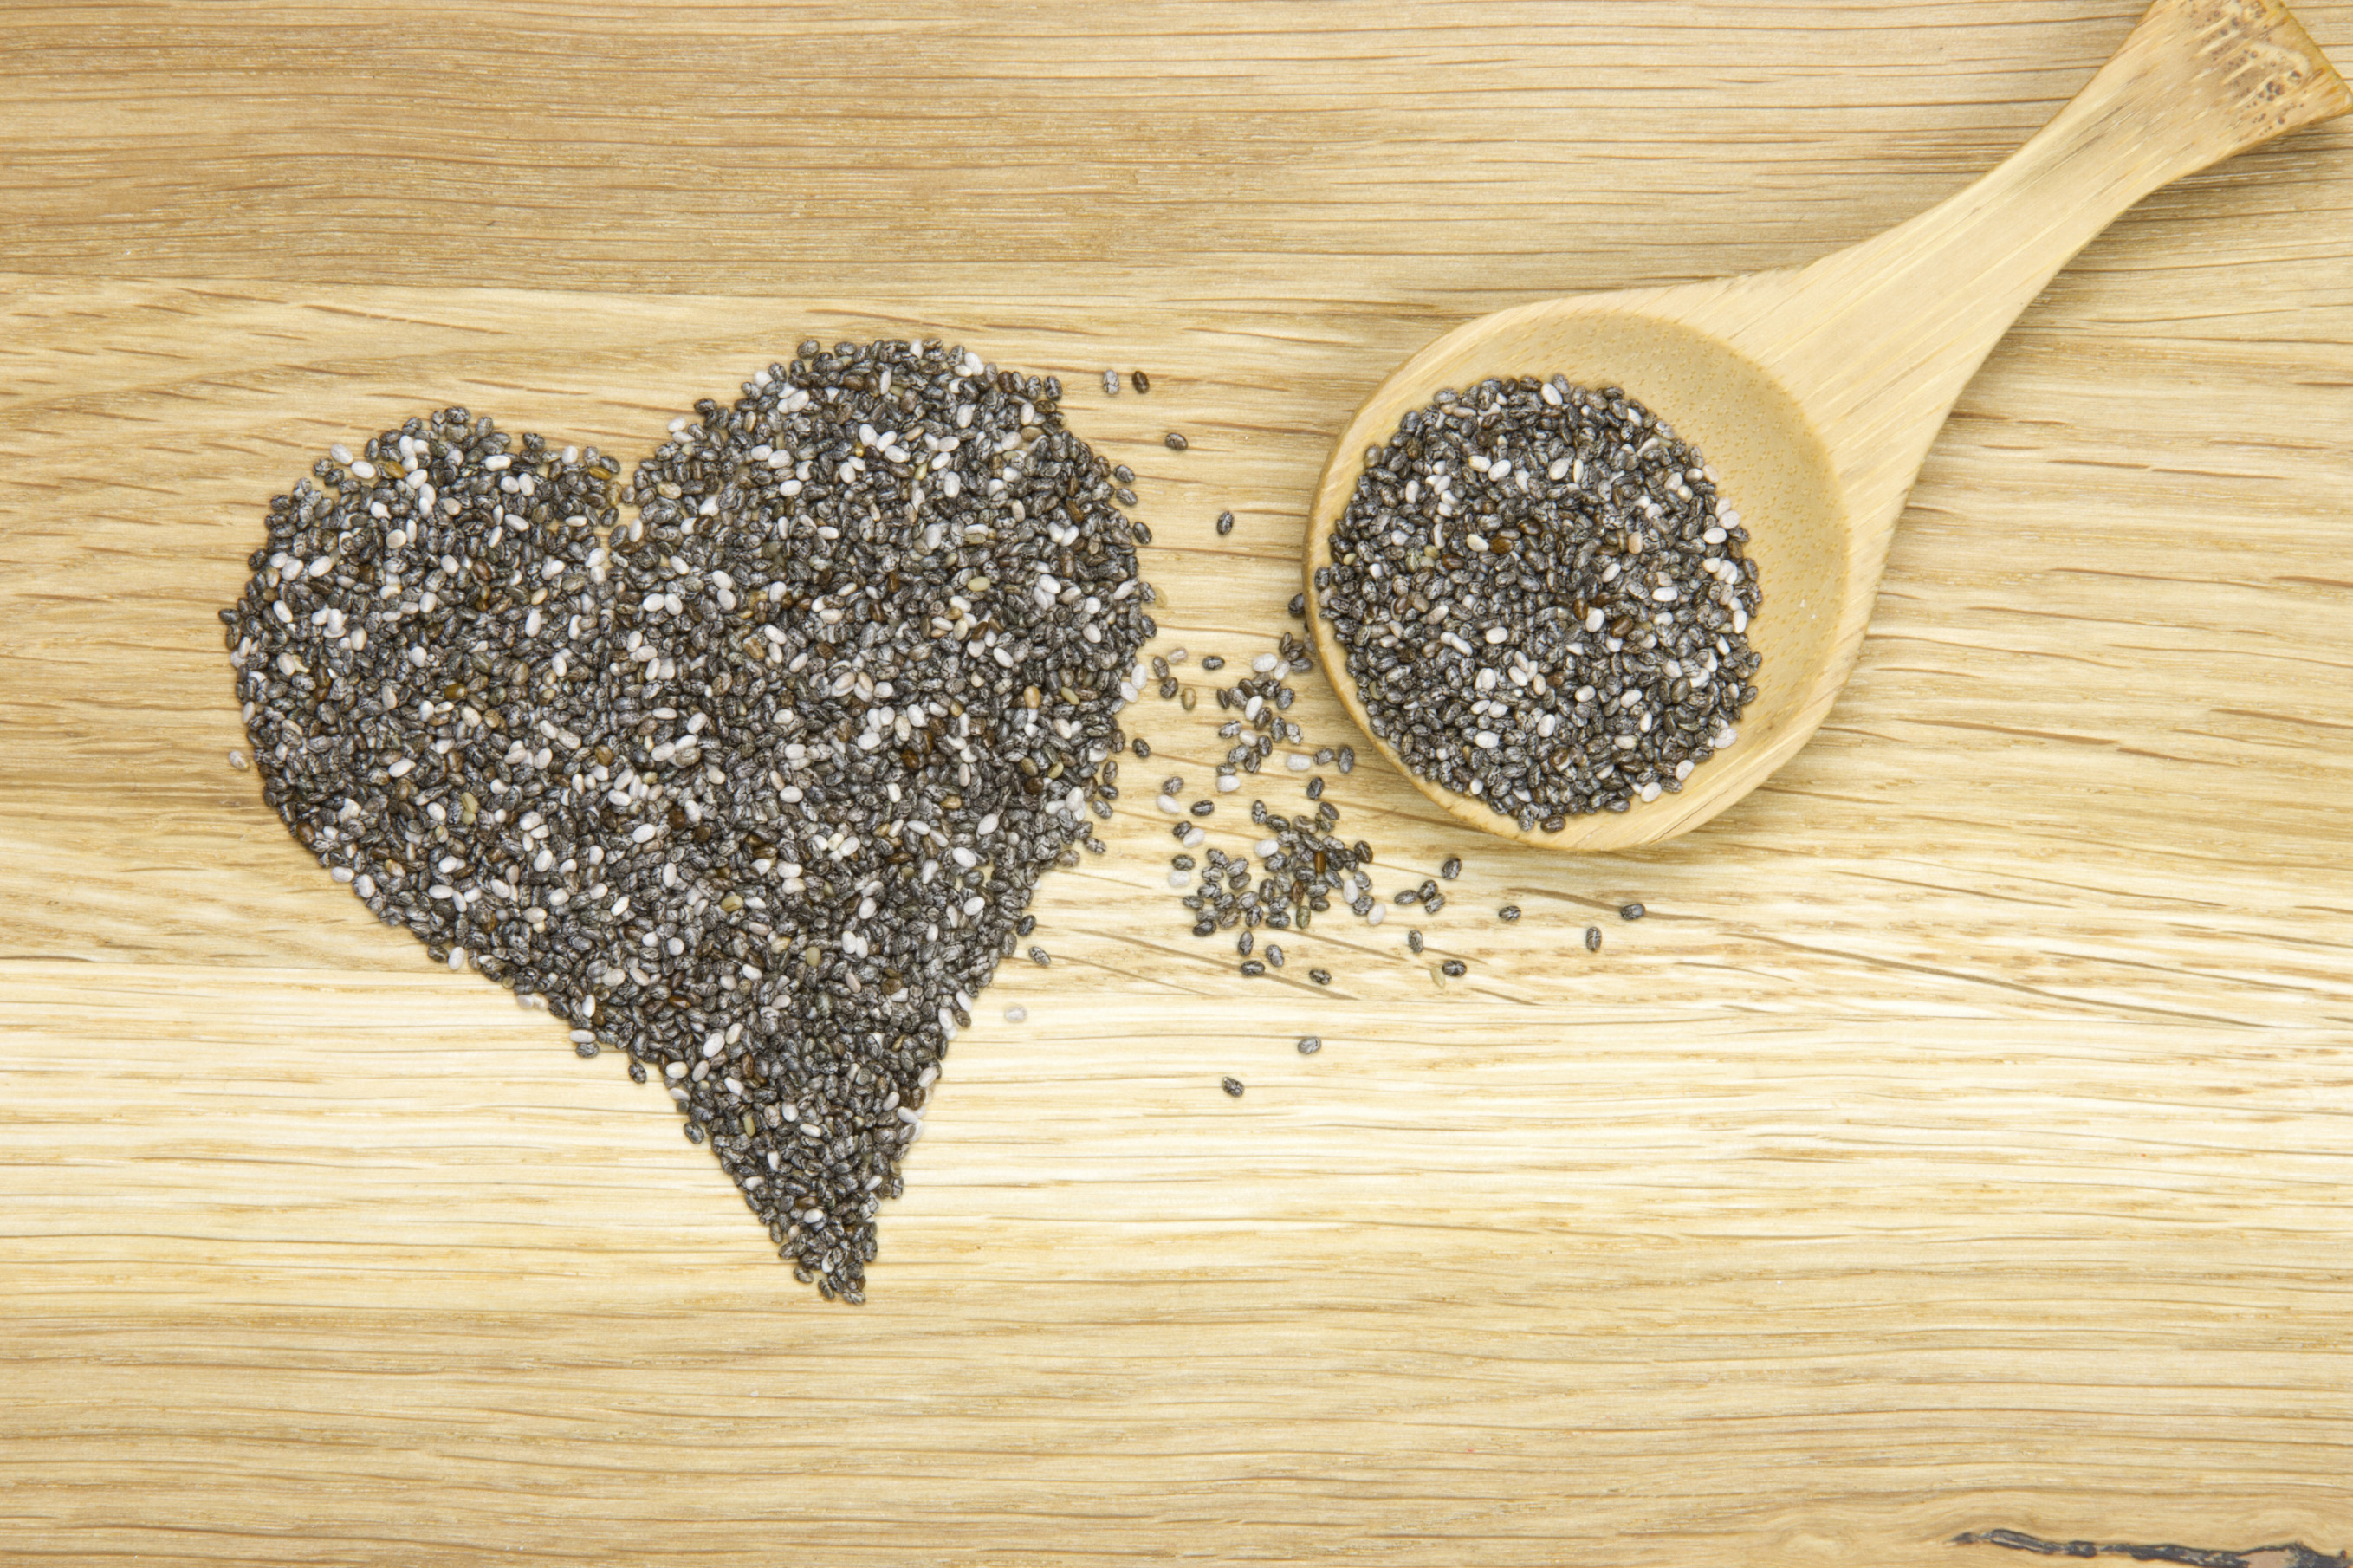 heart symbol made of black chia seeds and spoon